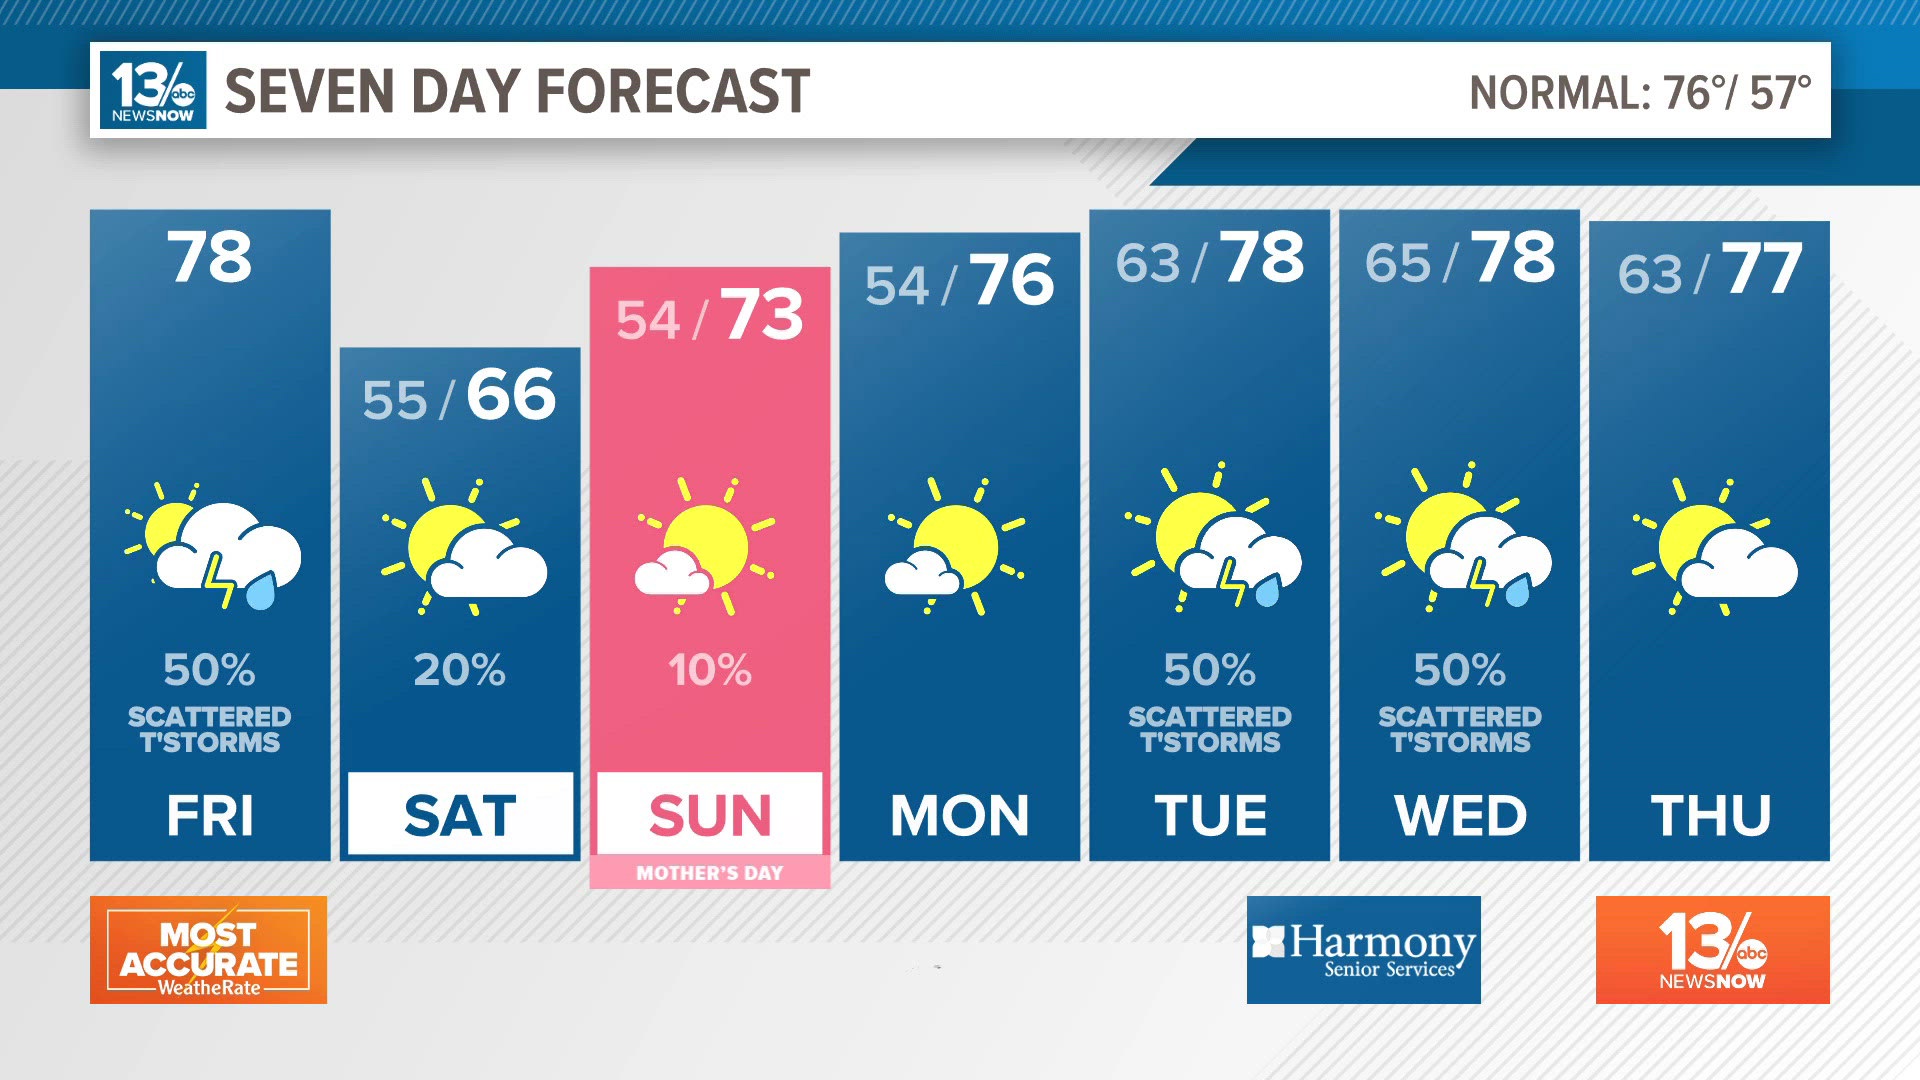 Cooler and less humid this weekend, and Mother's Day looks great!